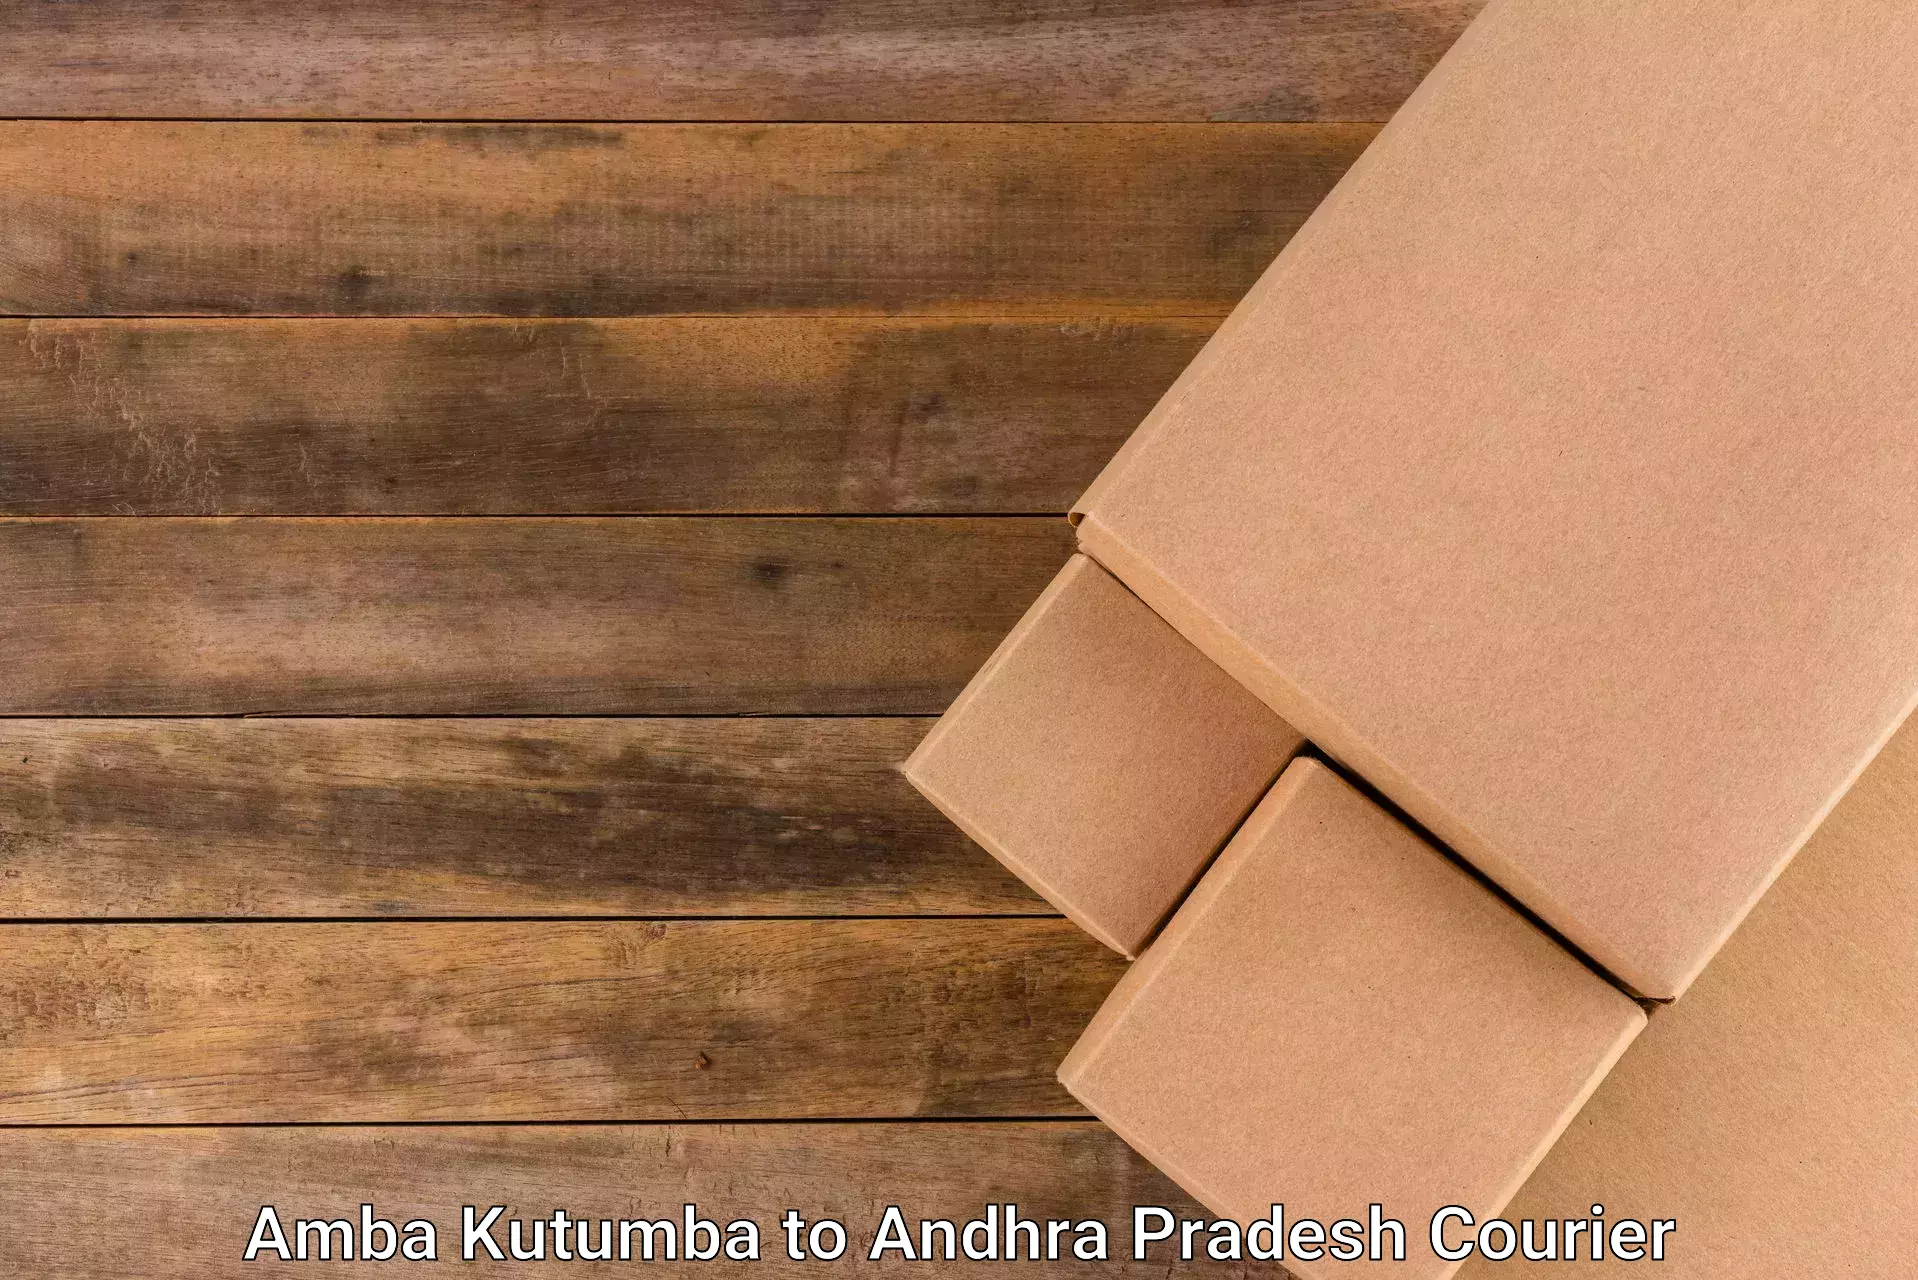 On-time delivery services Amba Kutumba to Visakhapatnam Port